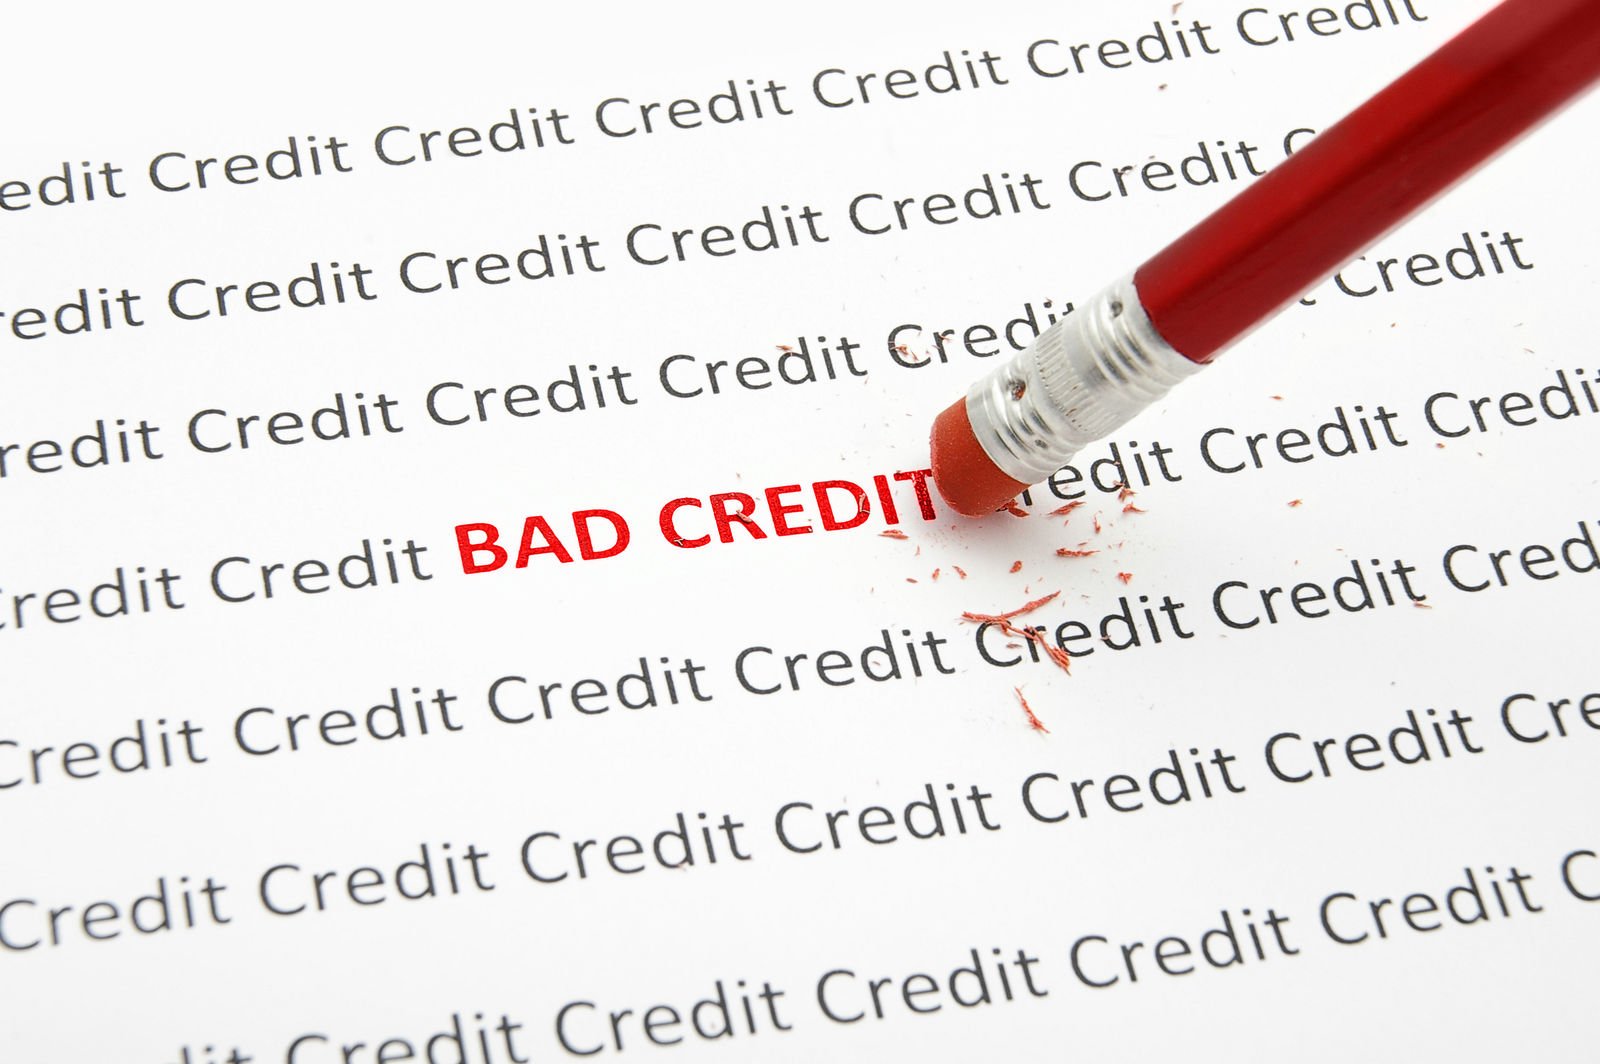 Does getting an auto insurance quote hurt your credit score?